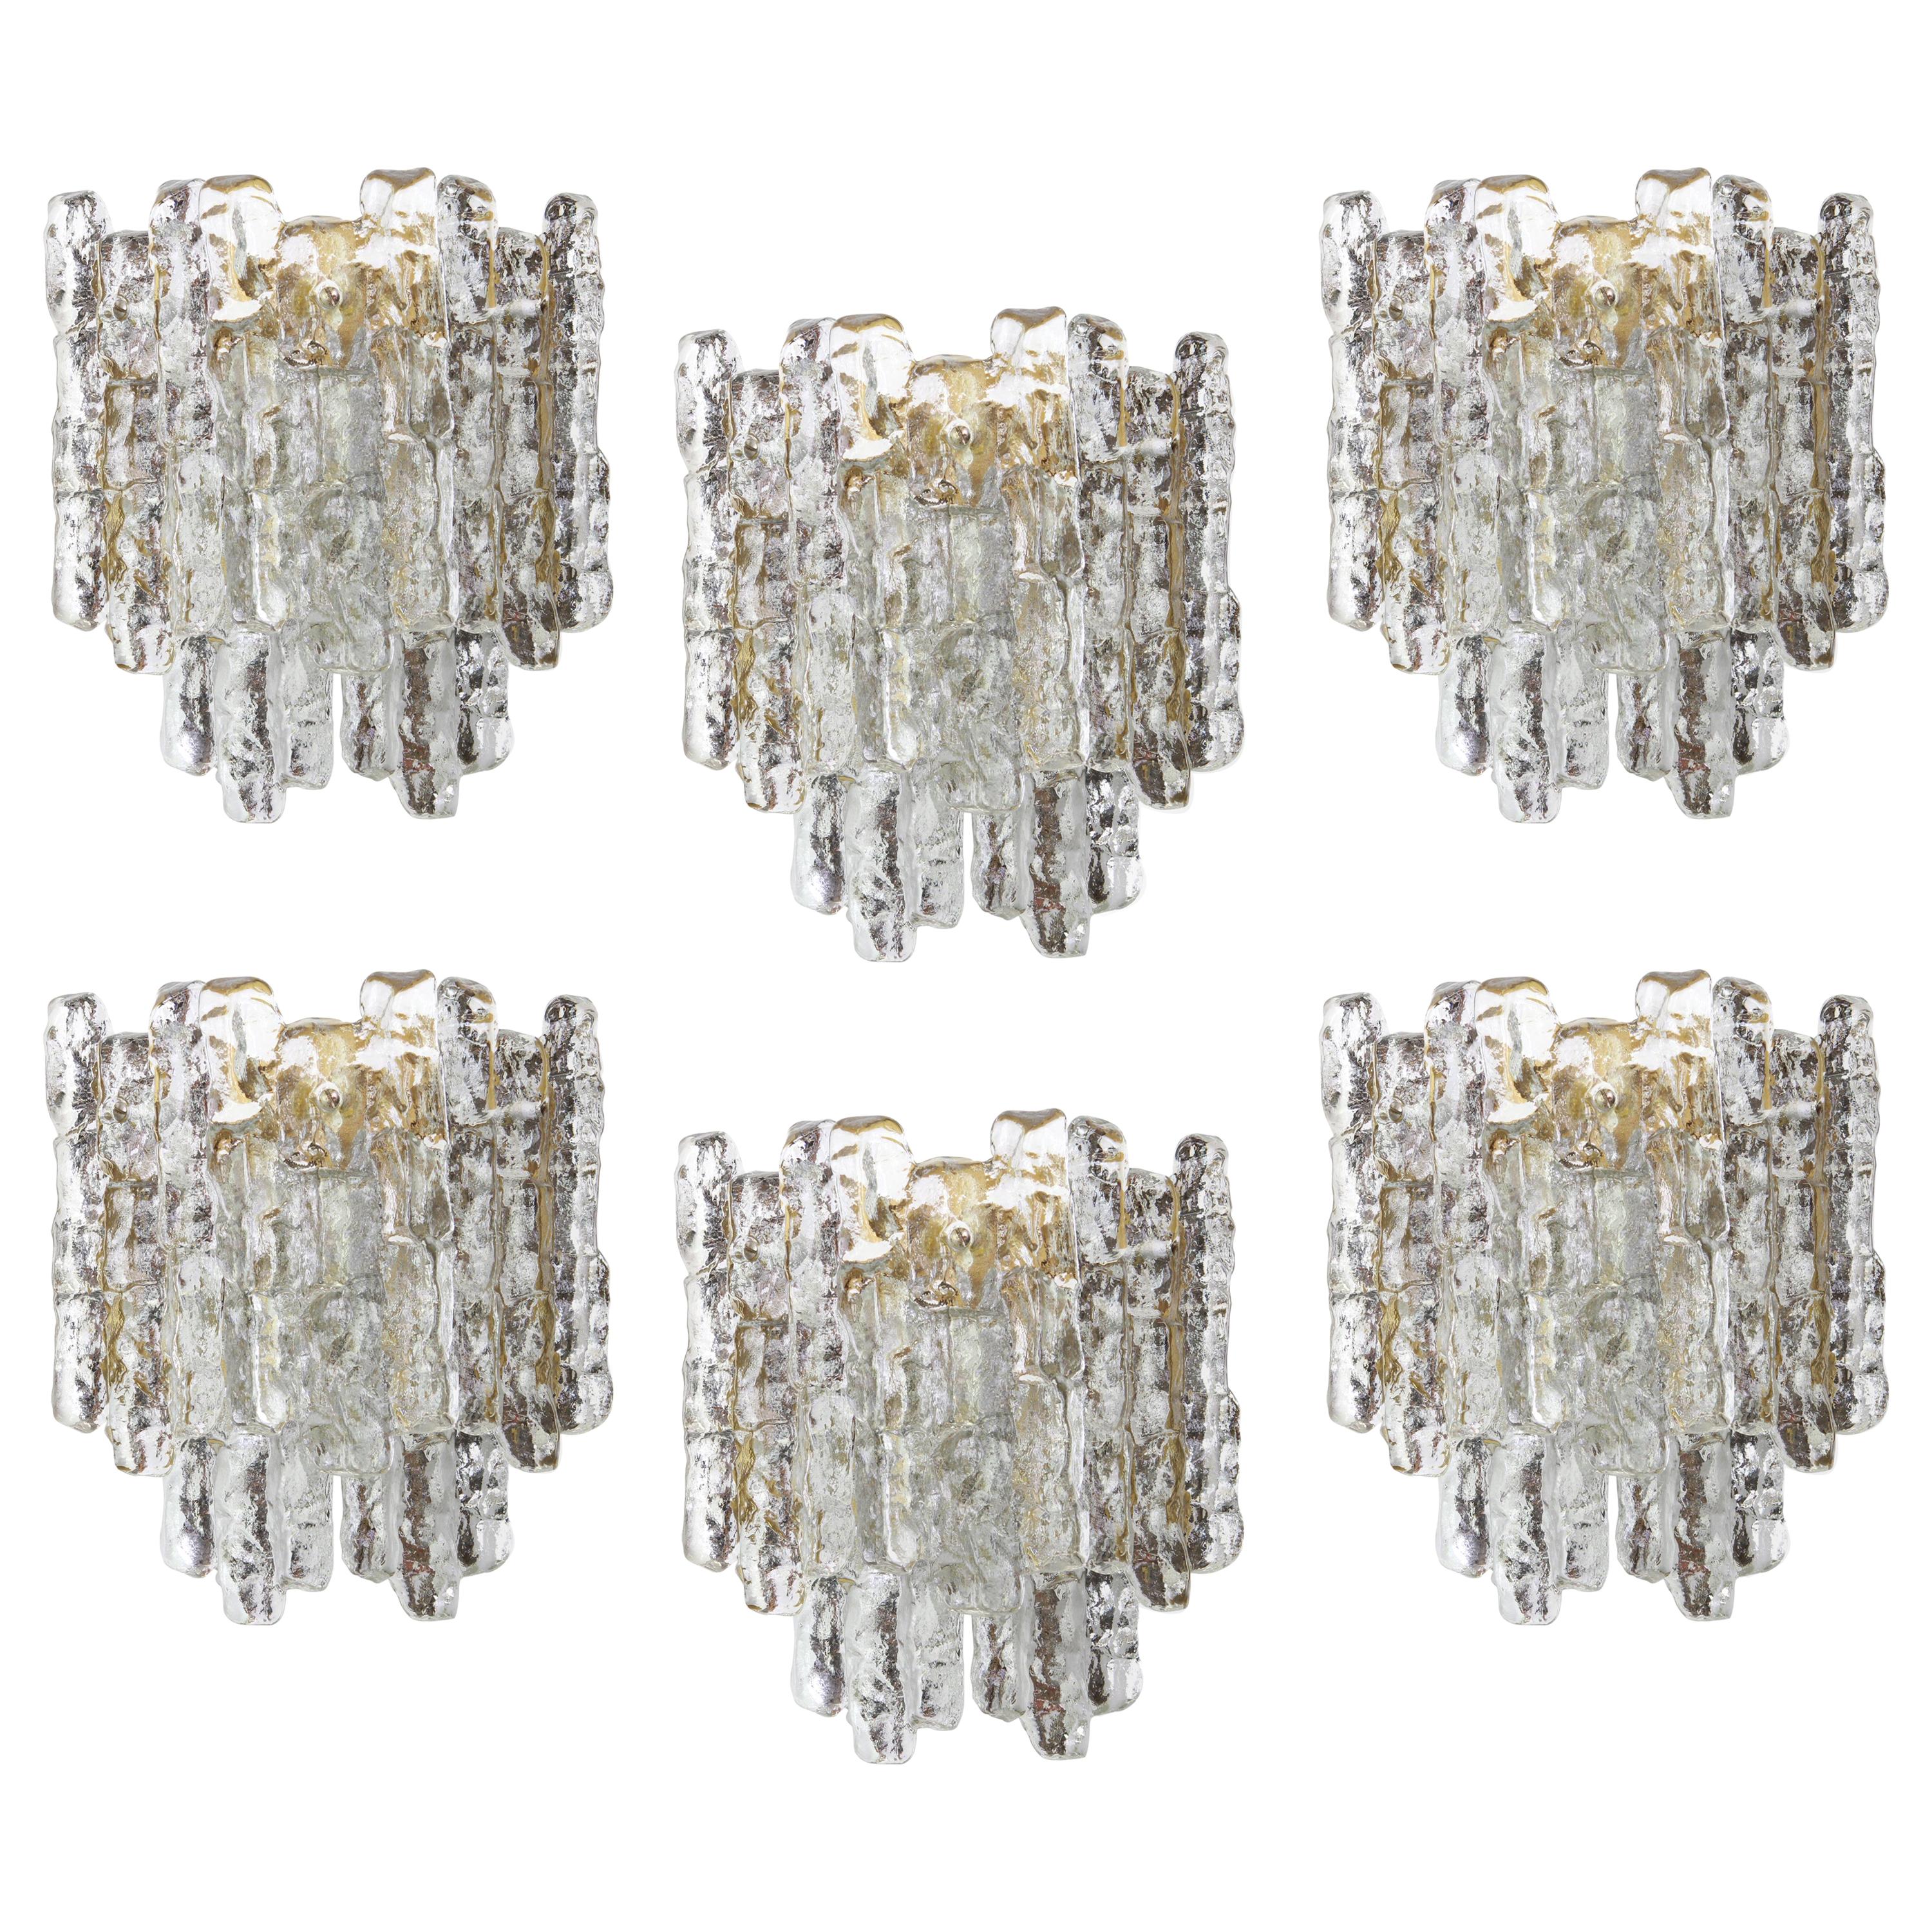 1 of 3 Pairs of Large Kalmar Sconces Wall Lights, Austria, 1960s For Sale